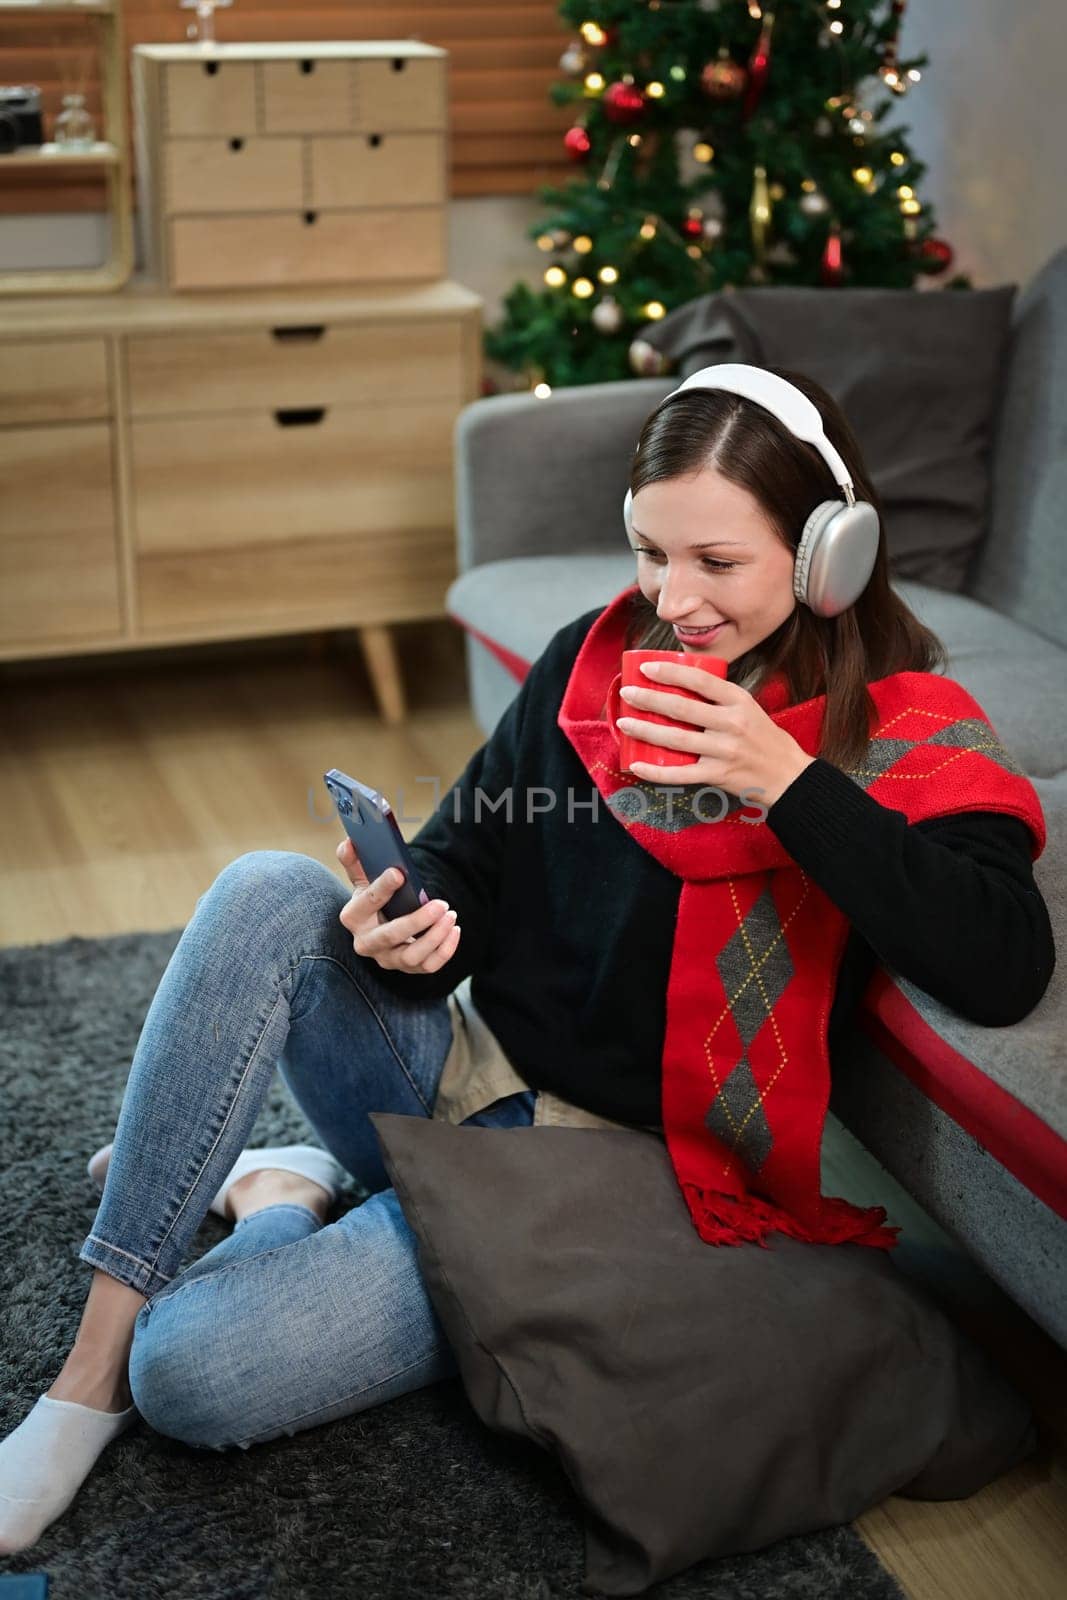 Portrait of caucasian woman reading message on mobile during winter sitting on floor against Christmas tree with lights.